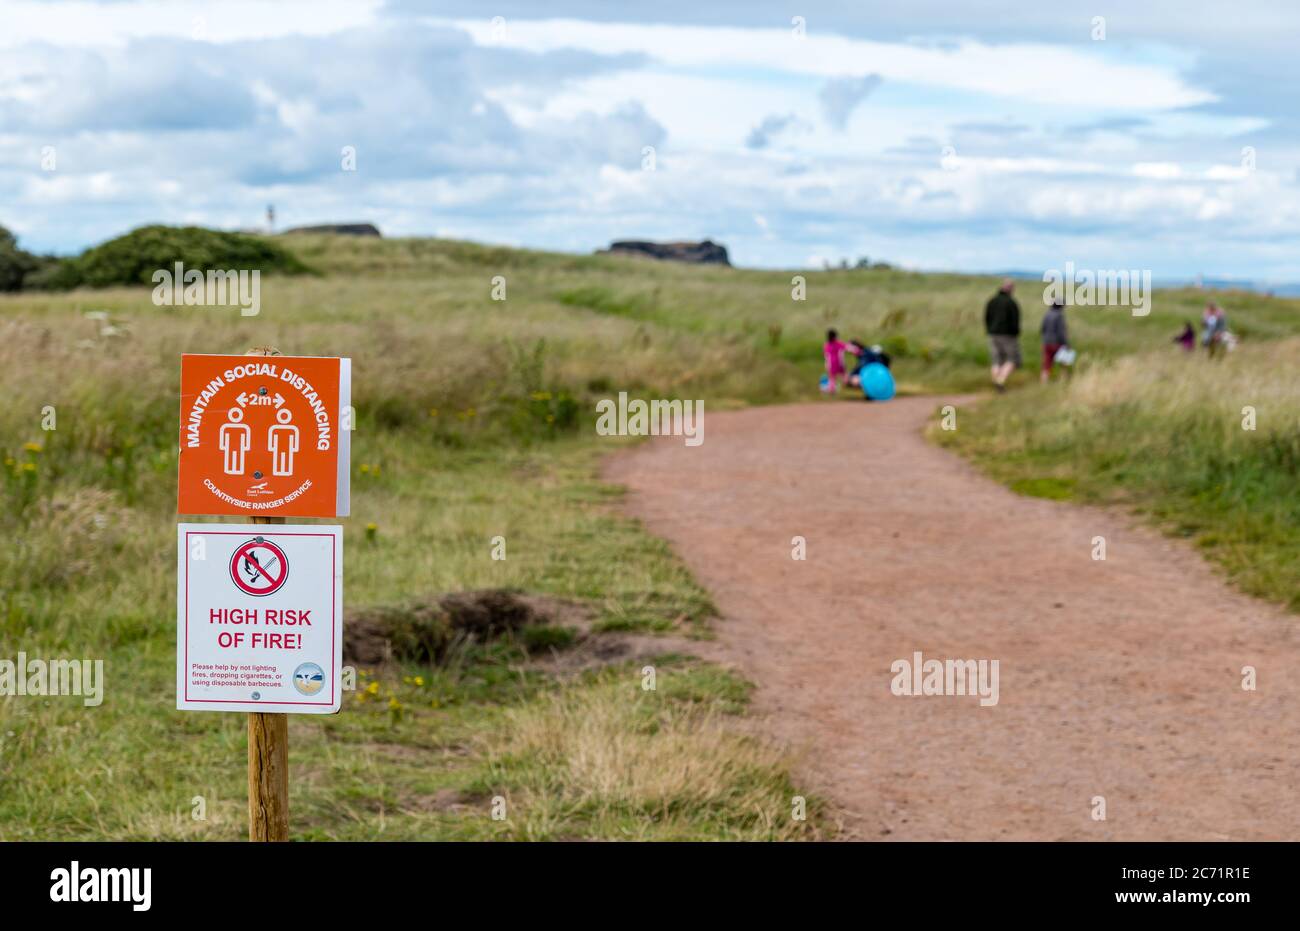 East Lothian, Scotland, United Kingdom, 13th July 2020. UK Weather: overcast at Yellowcraig beach after rain. Social distancing measures are in place on the route from the carpark to the beach during the Covid-19 coronavirus pandemic as people walk along the footpath with a notice to stay 2 metres apart and a warning about the fire risk Stock Photo